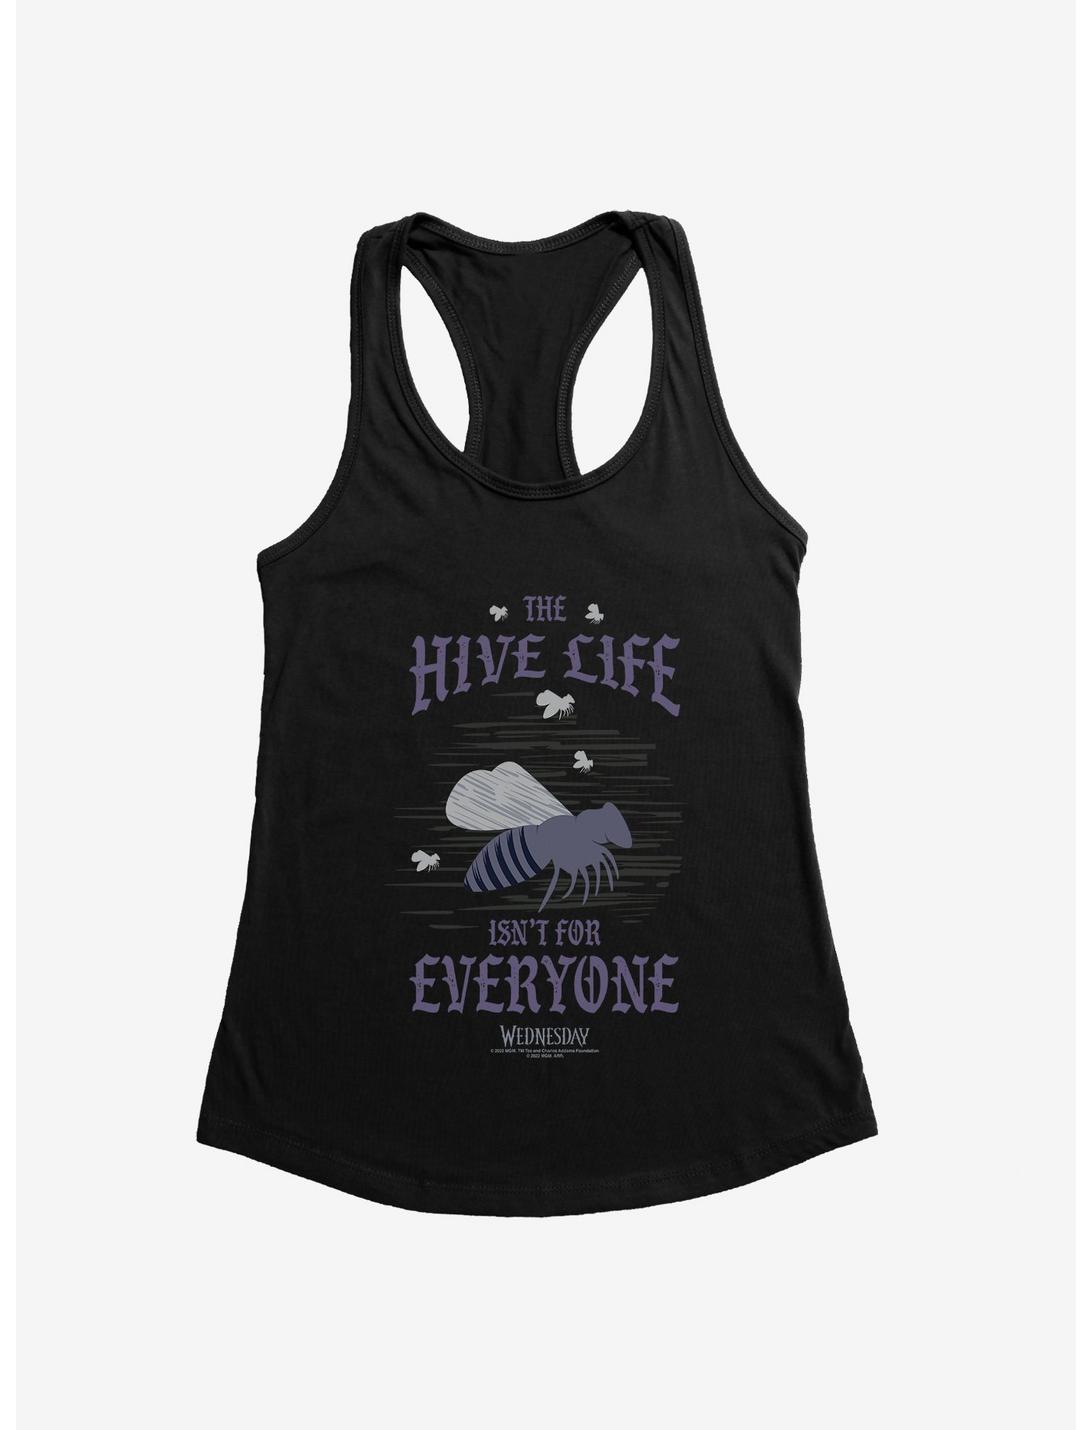 Wednesday The Hive Life Isn't For Everyone Girls Tank, BLACK, hi-res